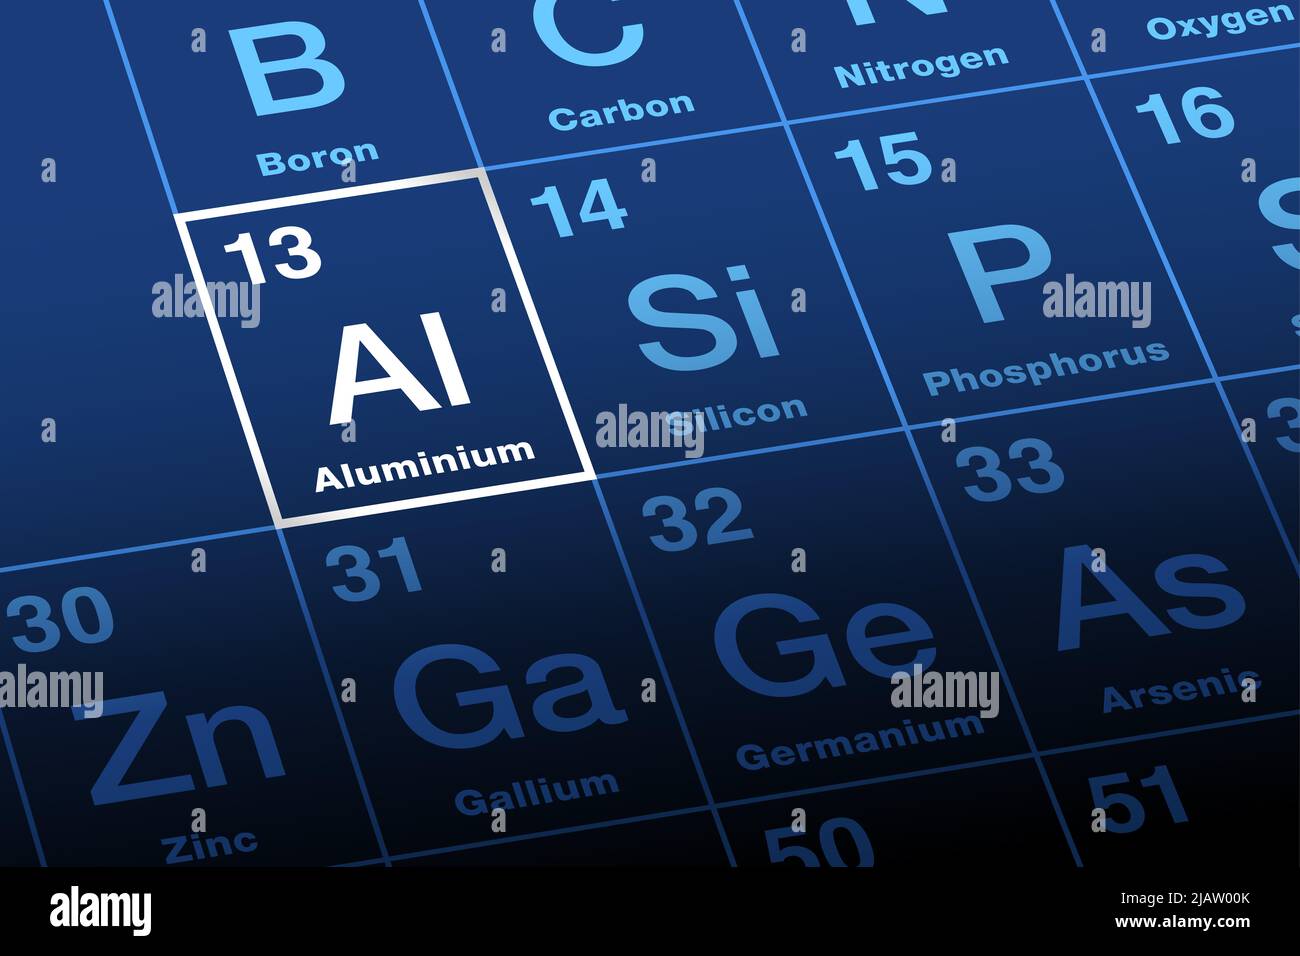 Aluminum, aluminum on periodic table of the elements. Chemical element and metal with symbol Al and atomic number 13. Stock Photo